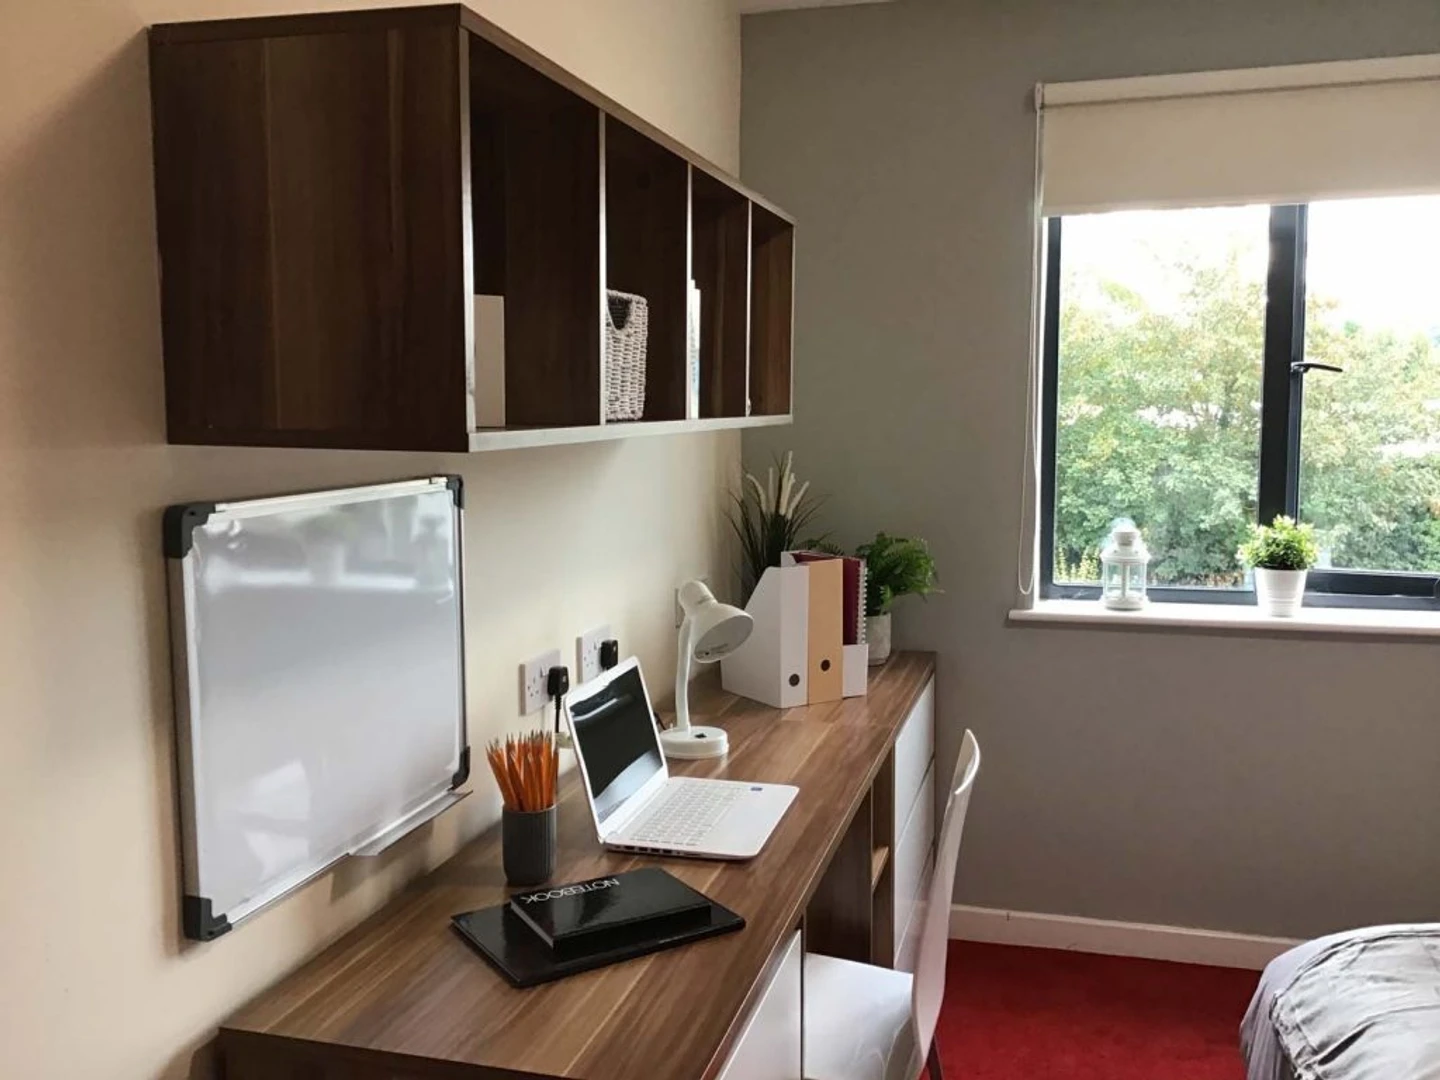 Room for rent in a shared flat in Canterbury